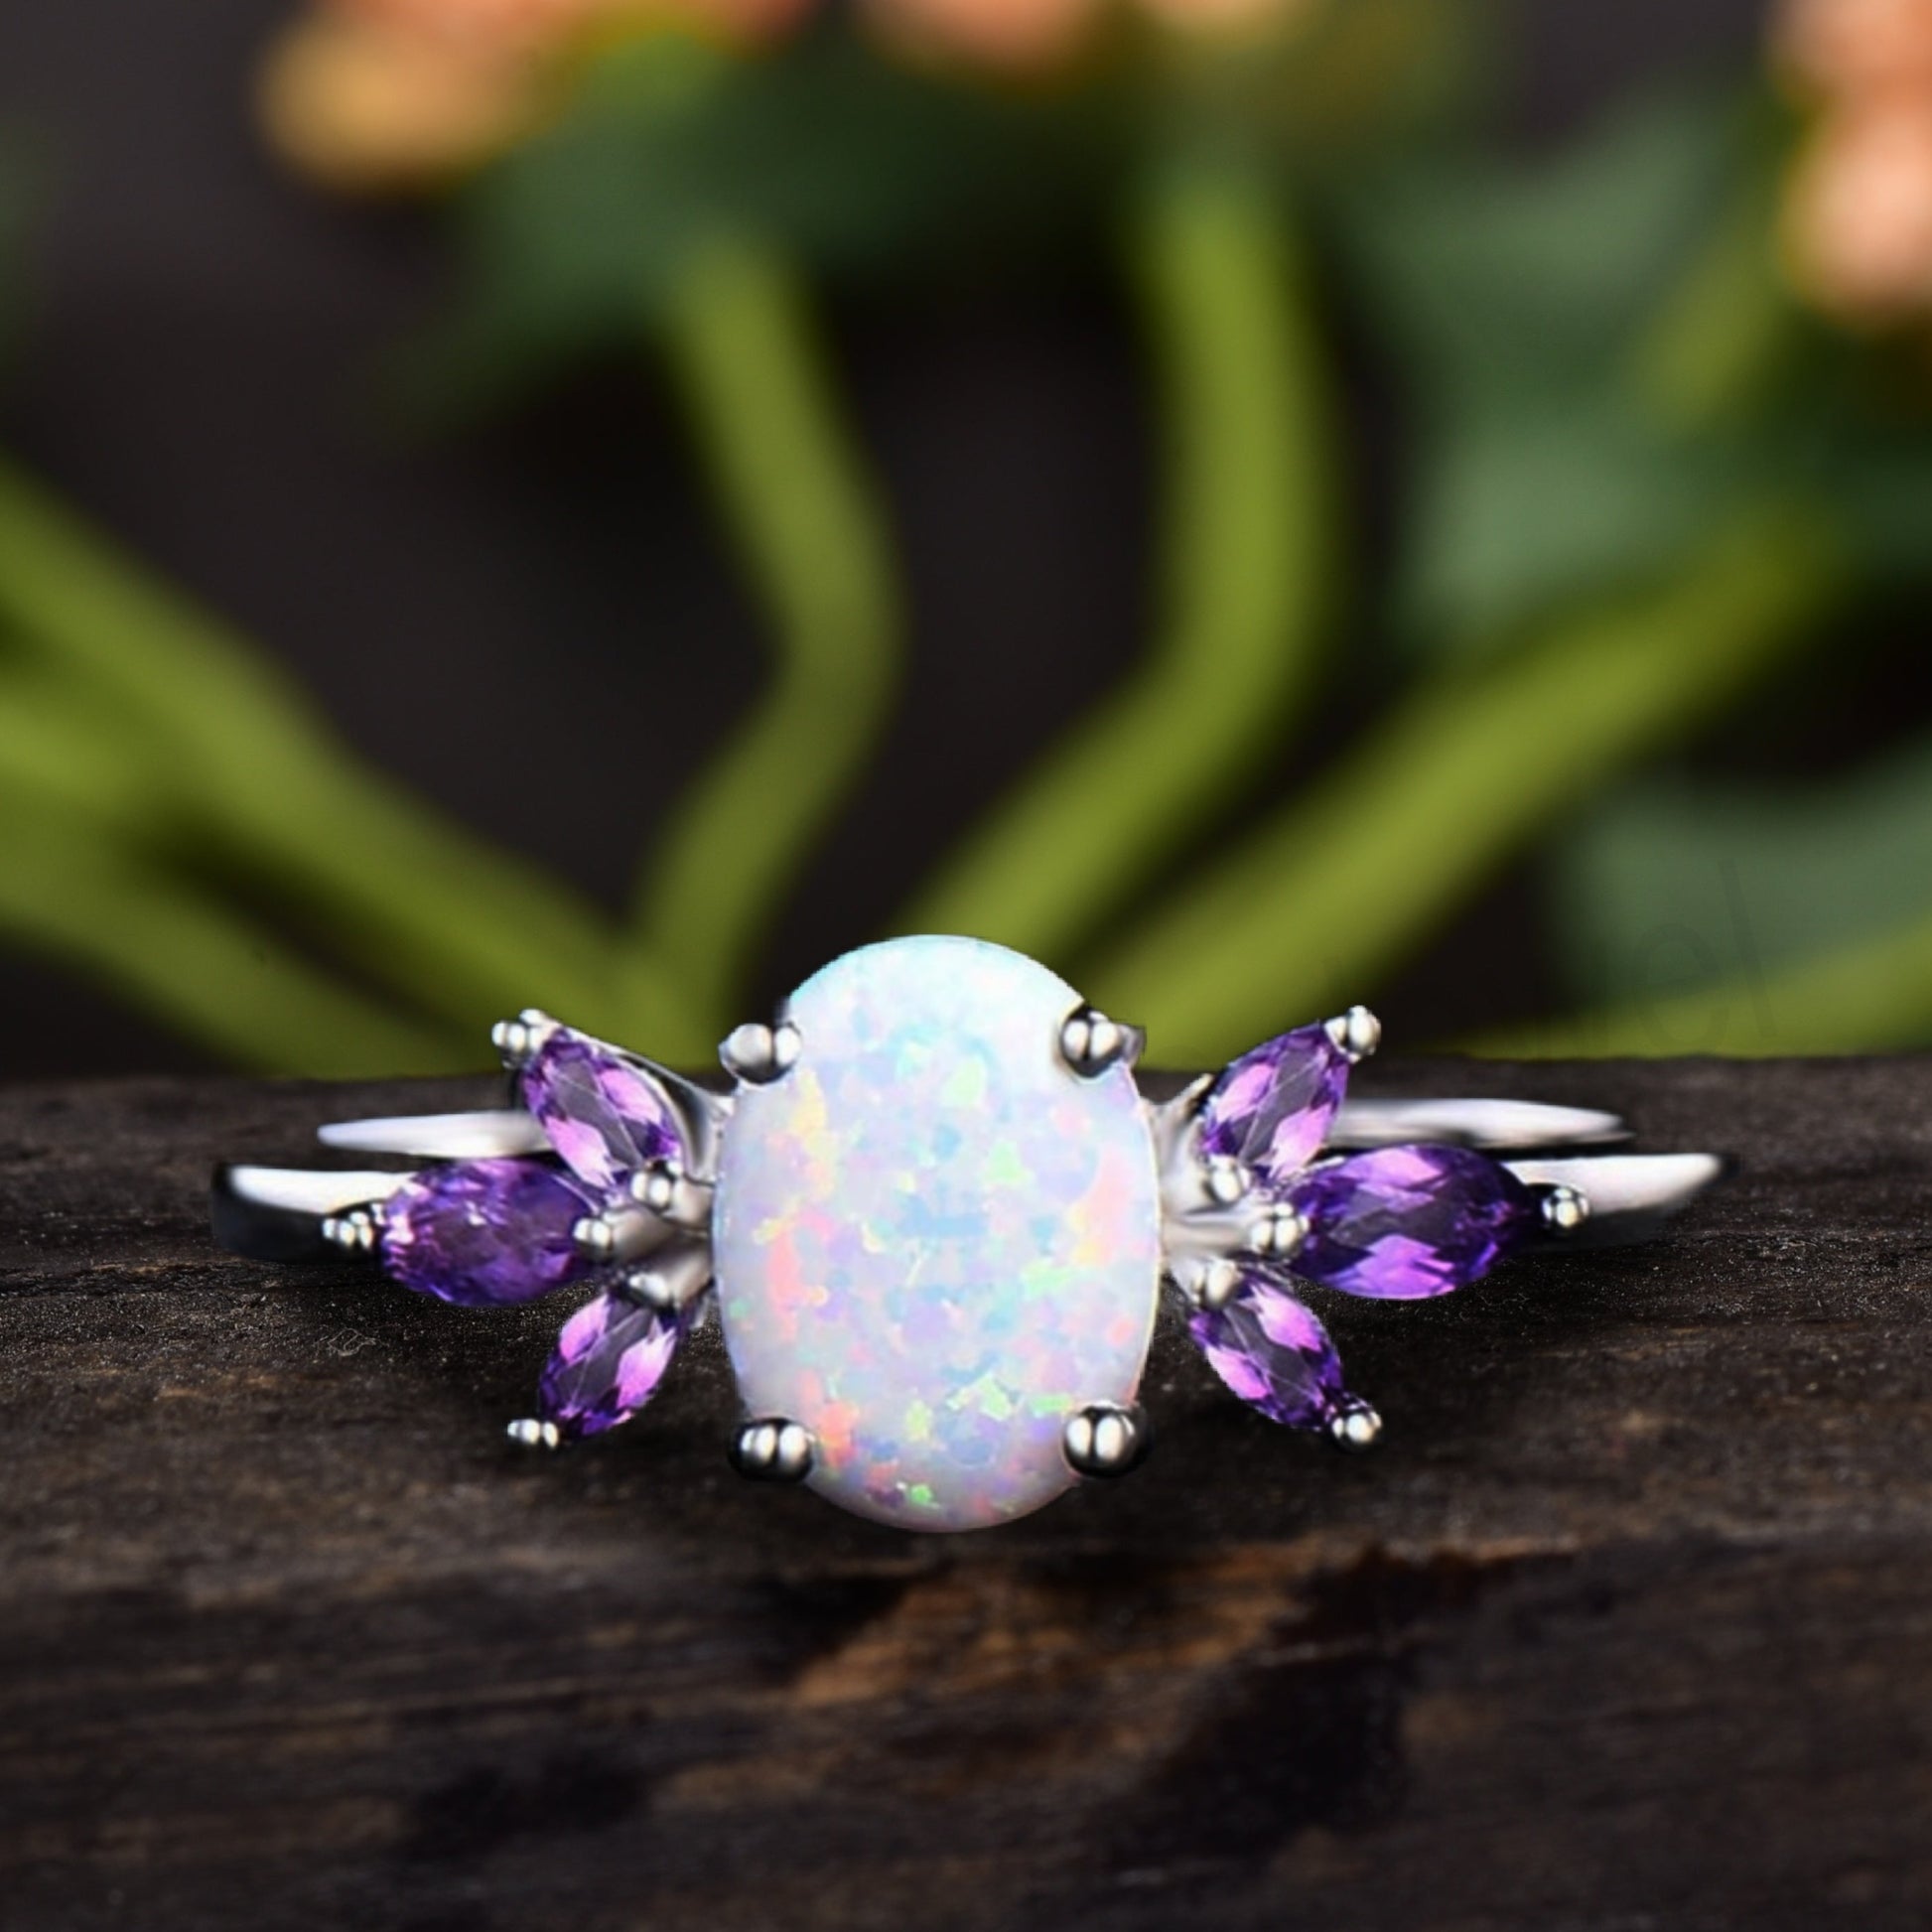 Oval Cut Fire Opal Cluster Engagement Ring